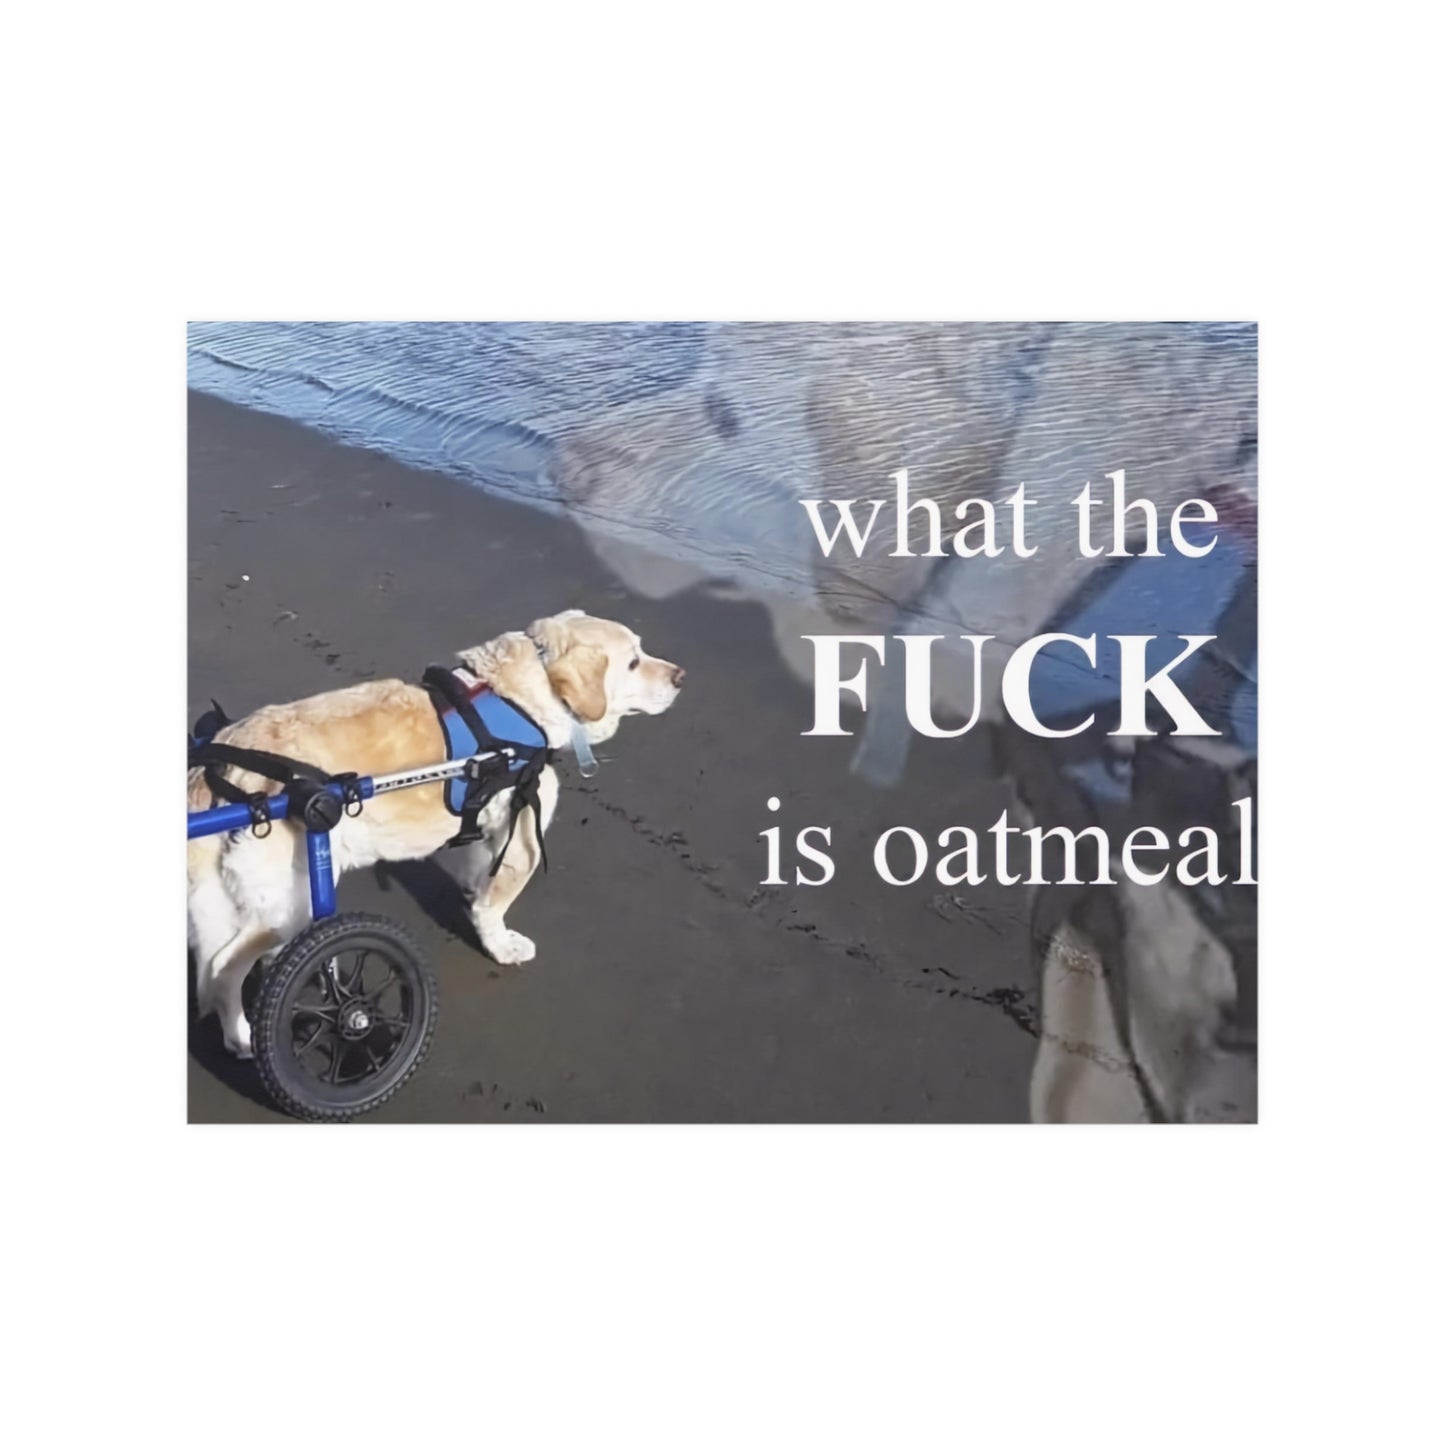 What The Fck Is Oatmeal Meme Poster.